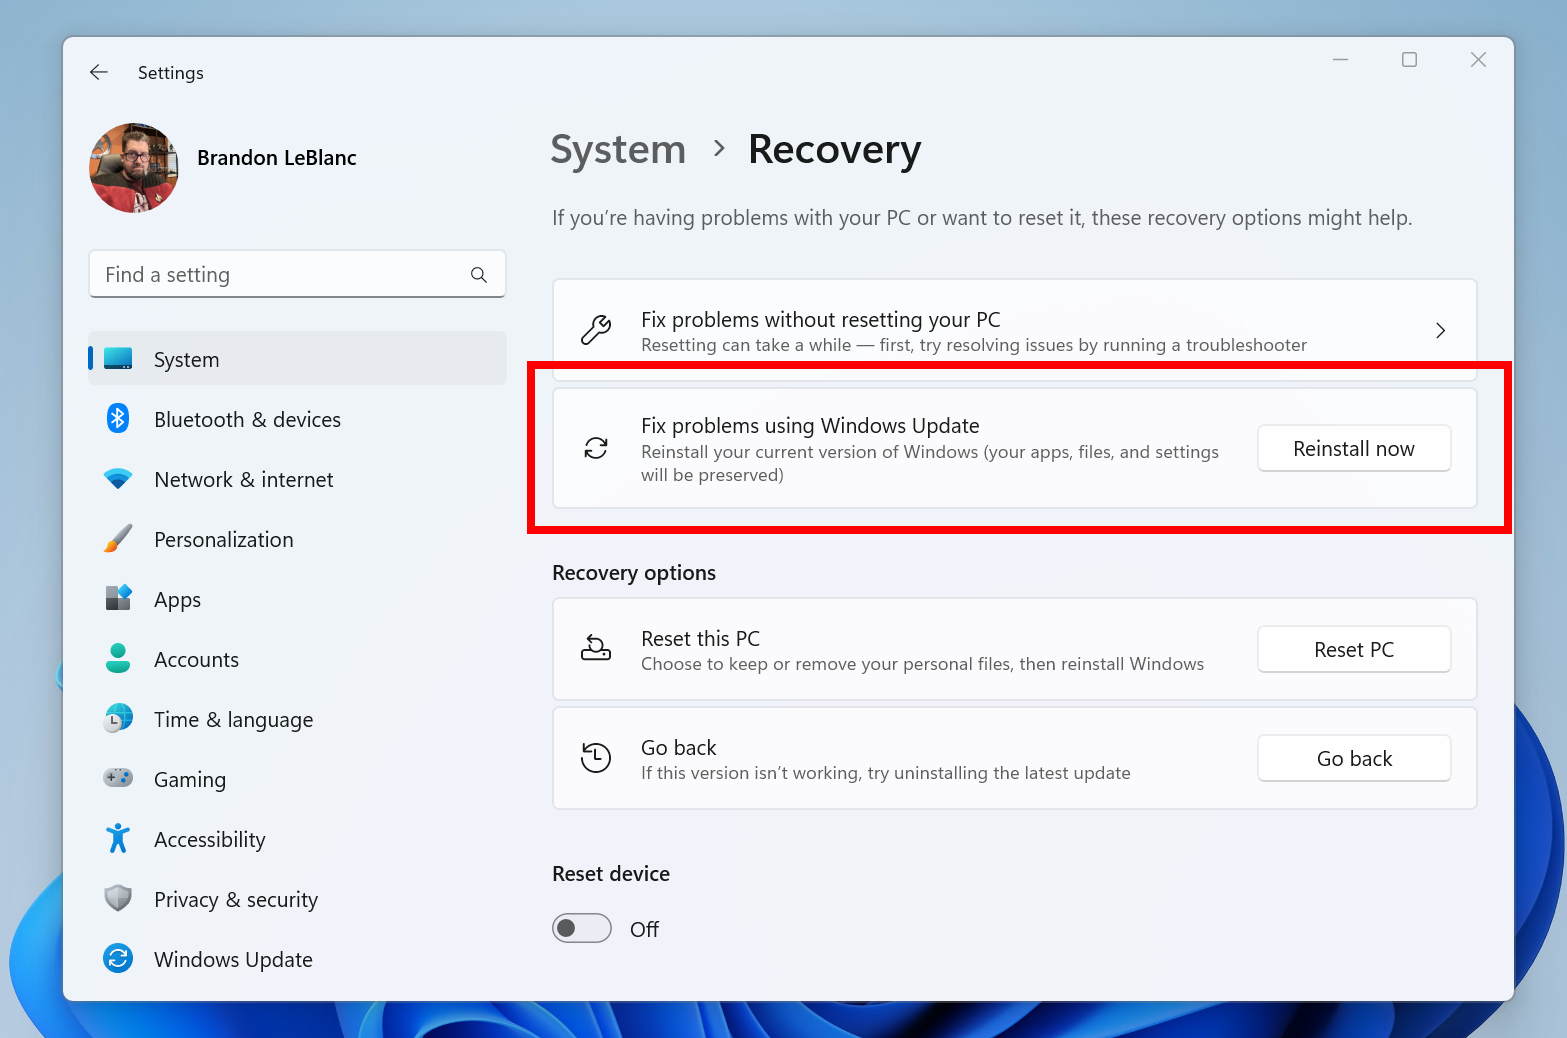 Screenshot of Windows 11 Settings app showing the option to fix problems using Windows Update